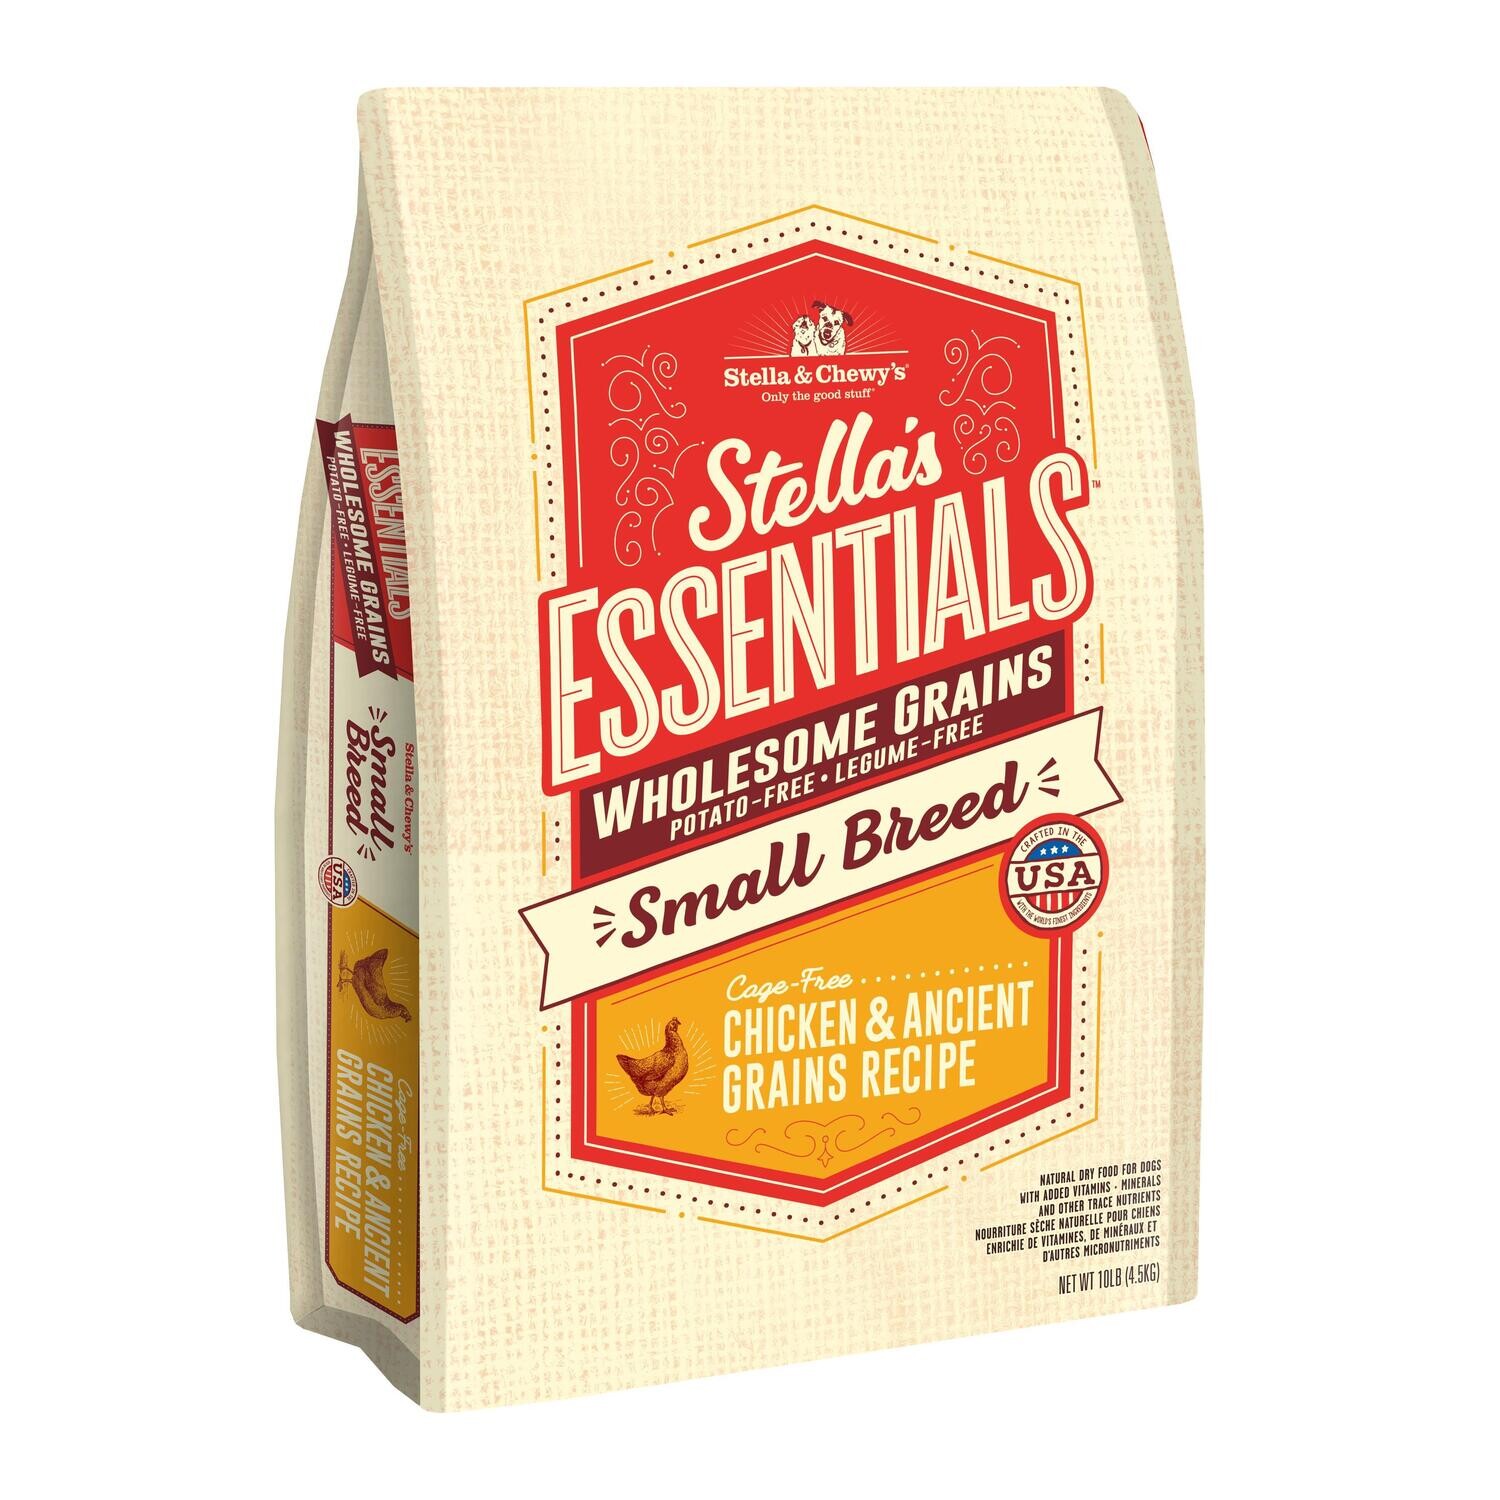 STELLA & CHEWY’S ESSENTIAL WHOLESOME GRAINS SMALL BREED